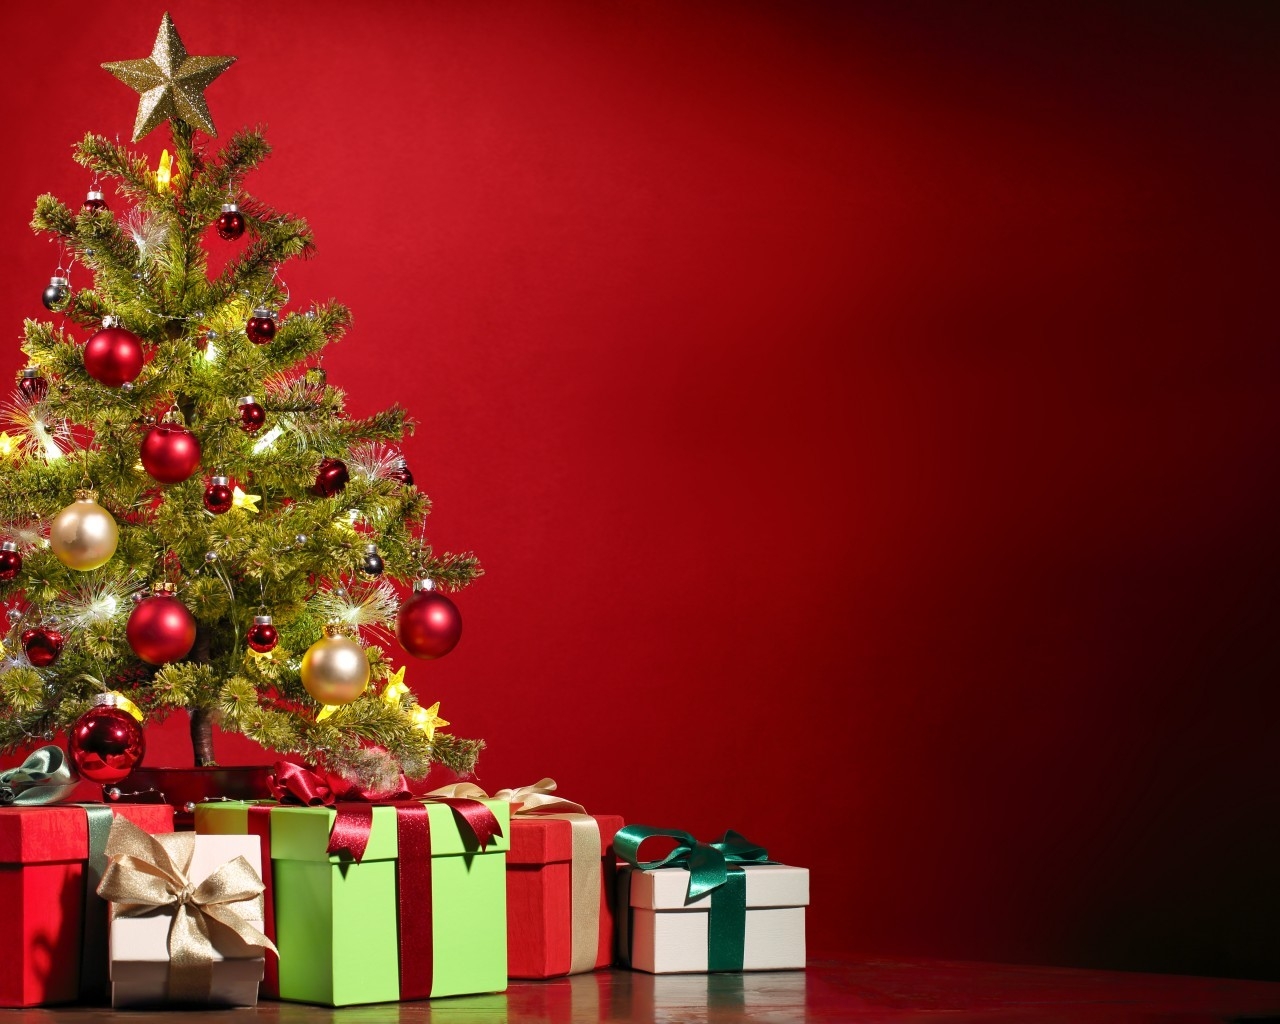 Special Christmas Tree and Gifts for 1280 x 1024 resolution